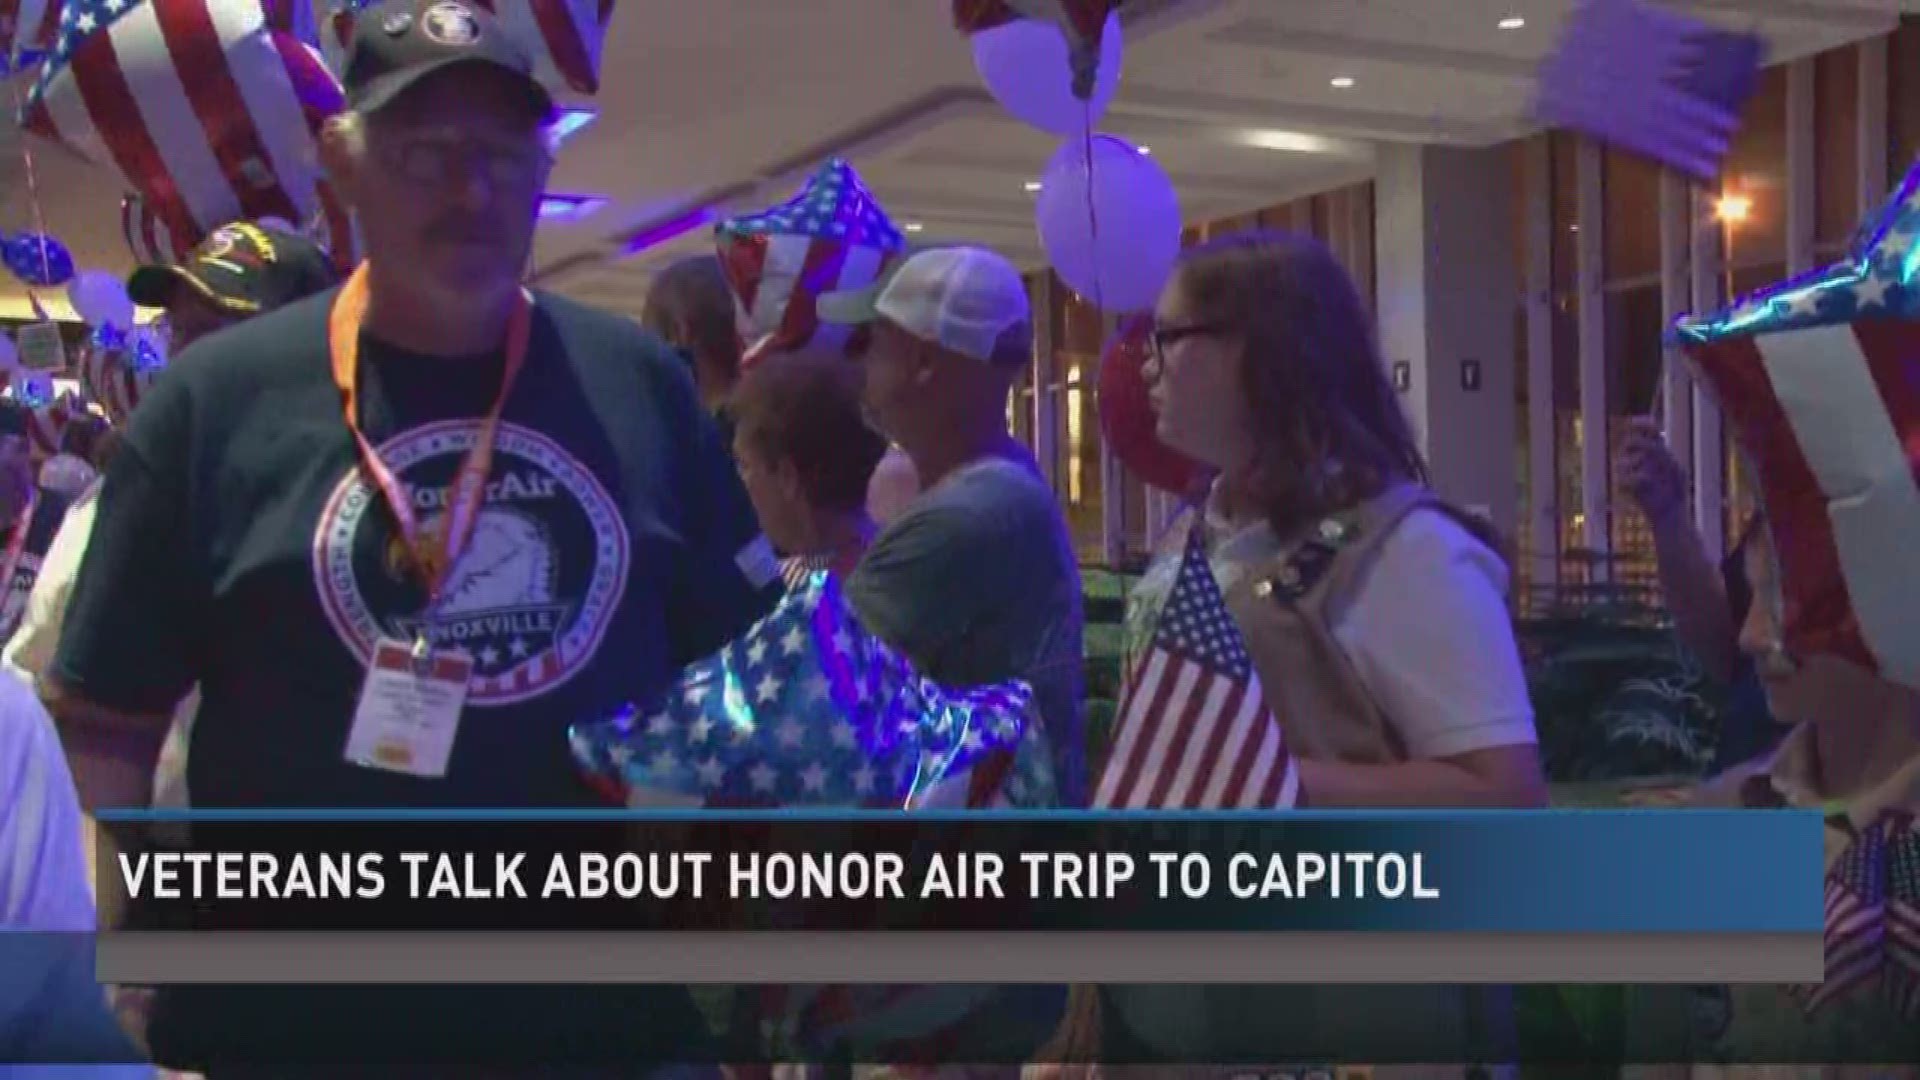 Honor Air Knoxville takes two and sometimes three flights a year. They shuttle a plane load of veterans and their escorts up to Washington to see the memorials built to honor their service.